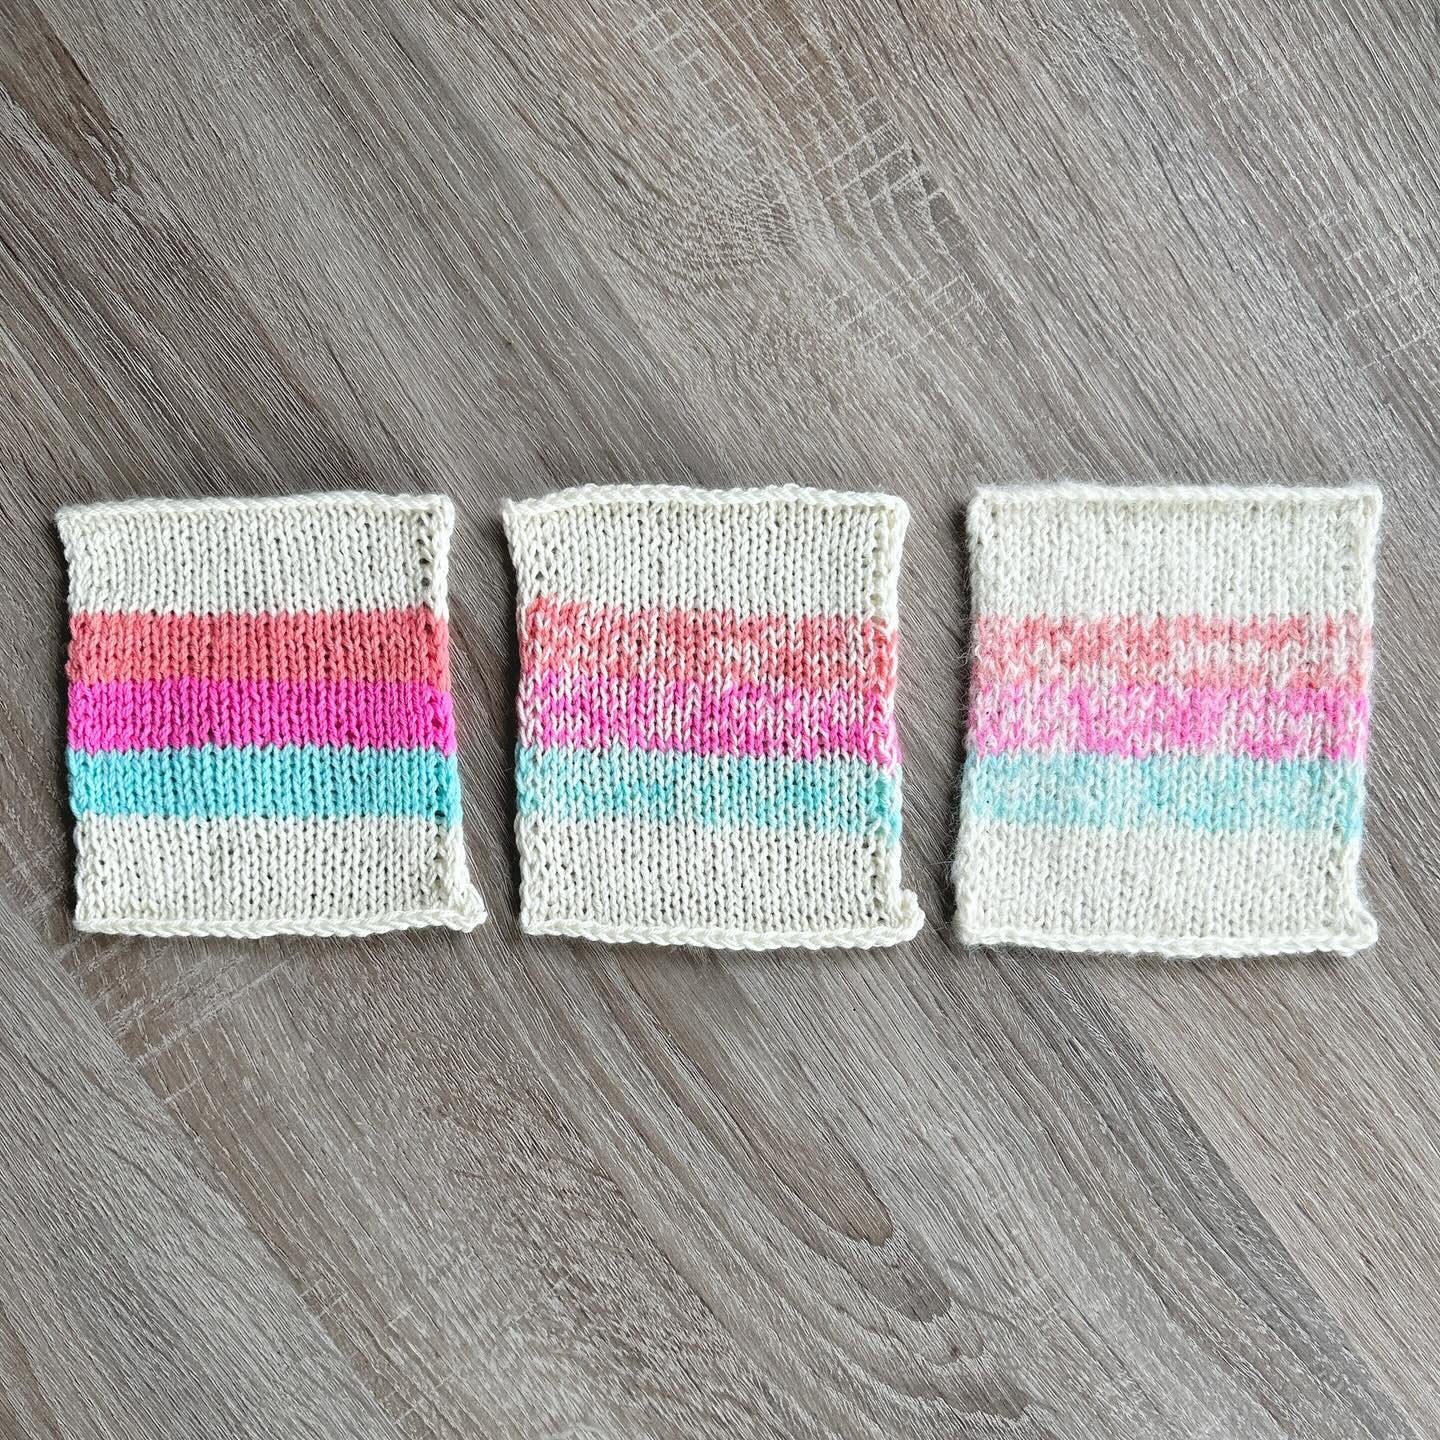 I&rsquo;ve had a few people ask for recommendations on marled knitting with stripes for the Prismatic Reflection sweater, so I knit up some comparison swatches. For a more comprehensive breakdown plus a how-to tutorial, view the full blog post in my 